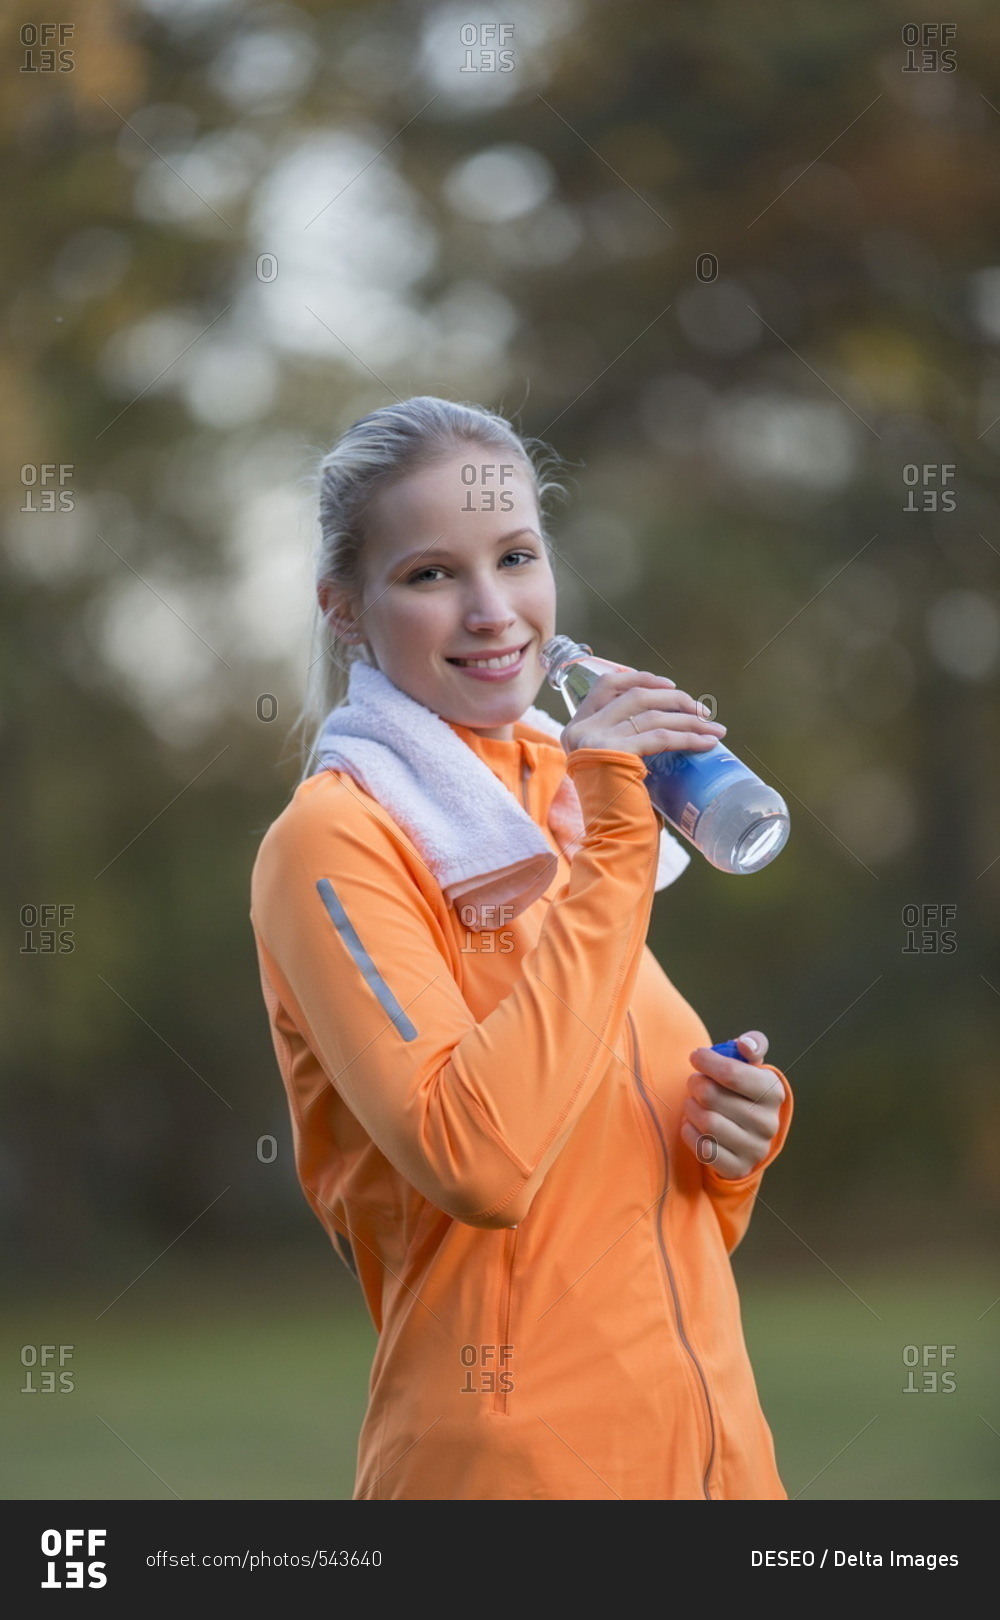 Pretty blonde woman drinking water in park after doing sport and smiling at camera